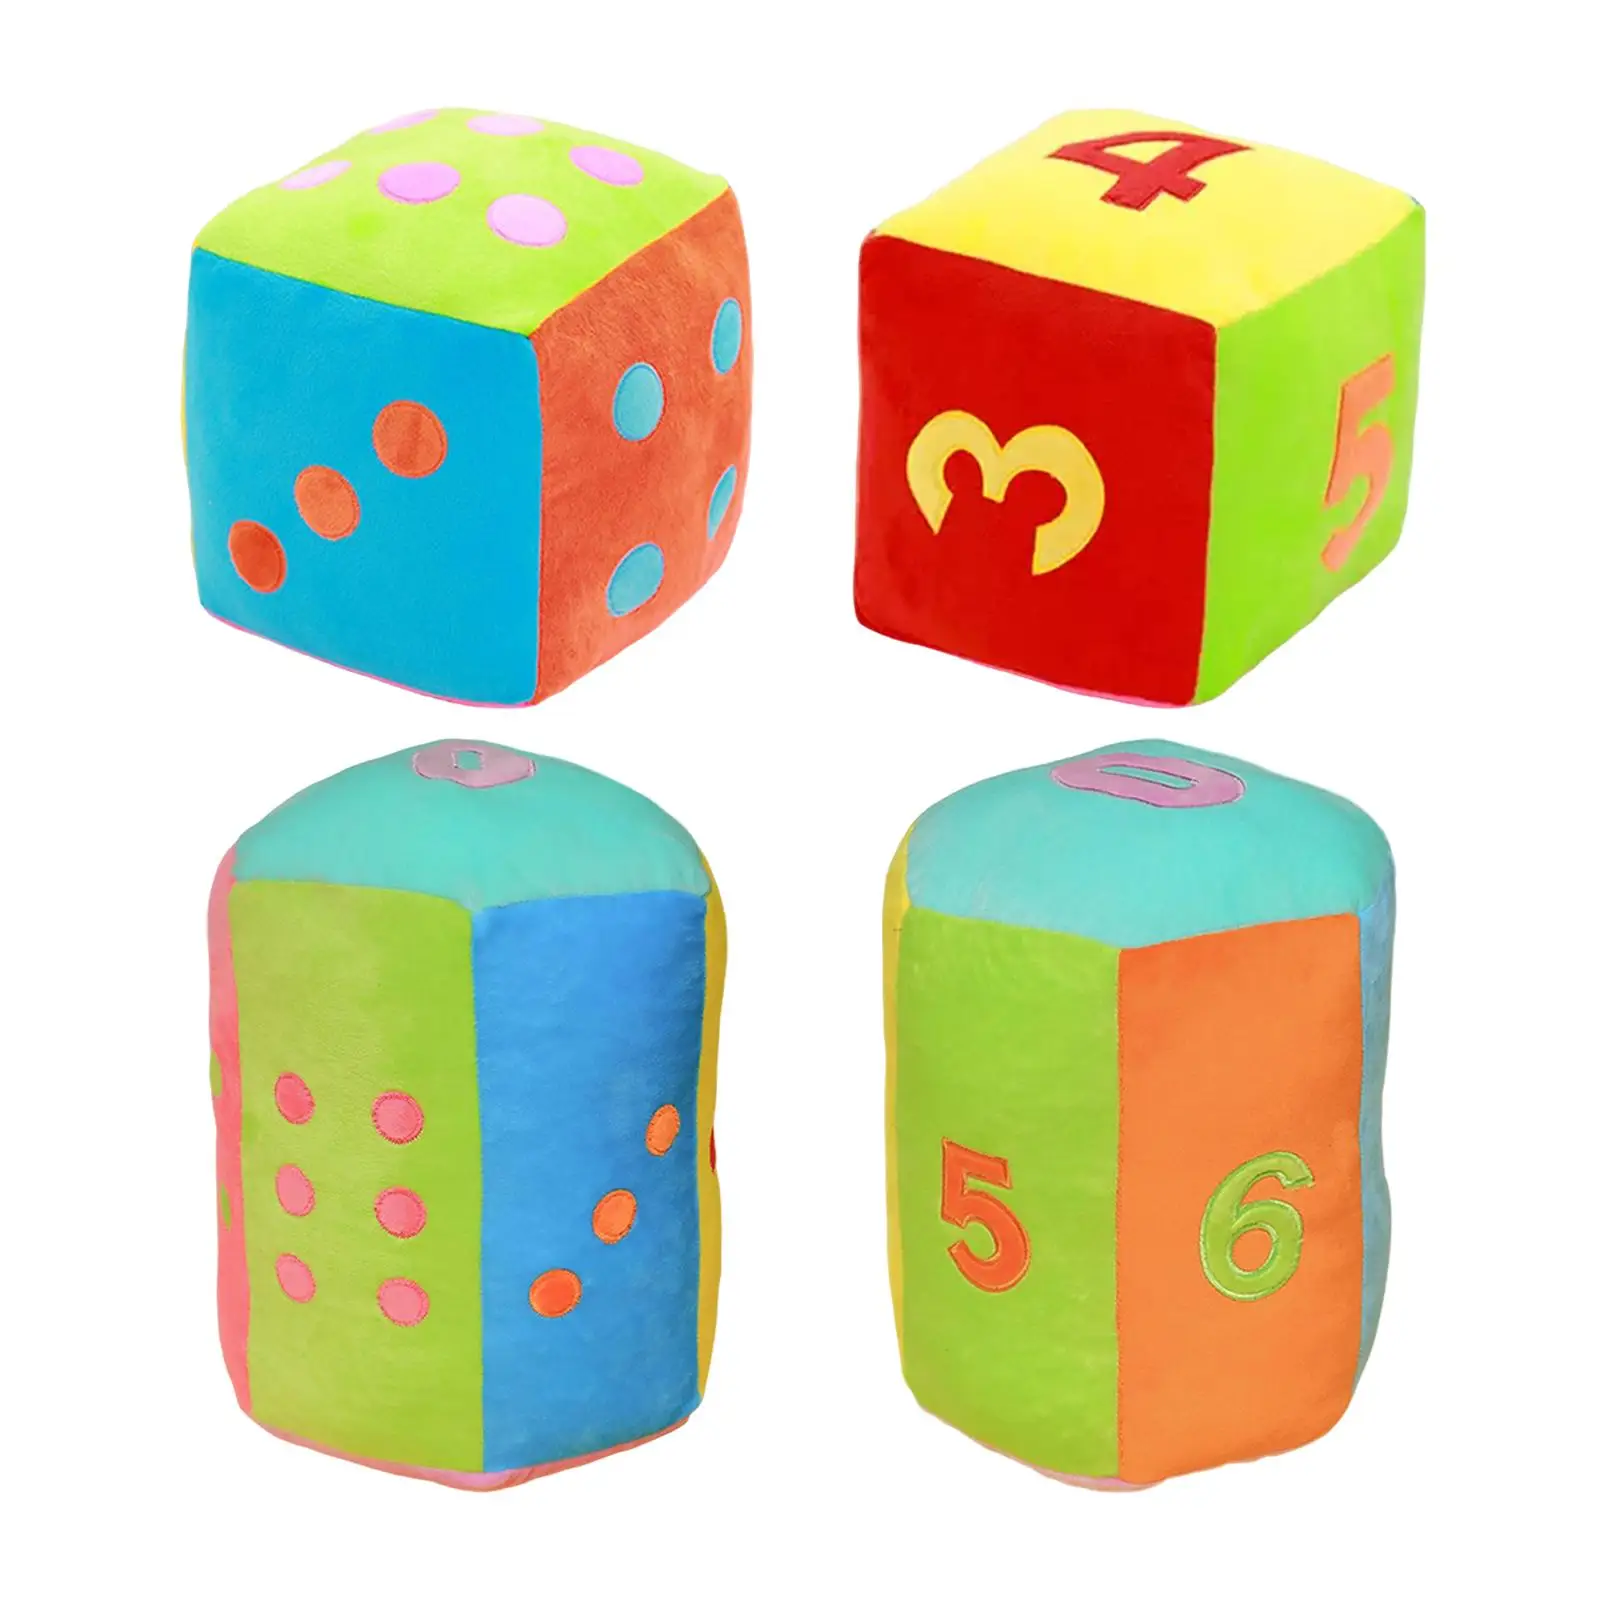 Plush Dice Toy Stuffed Toys Playing Games Party Decorations Educational for Girls Boys